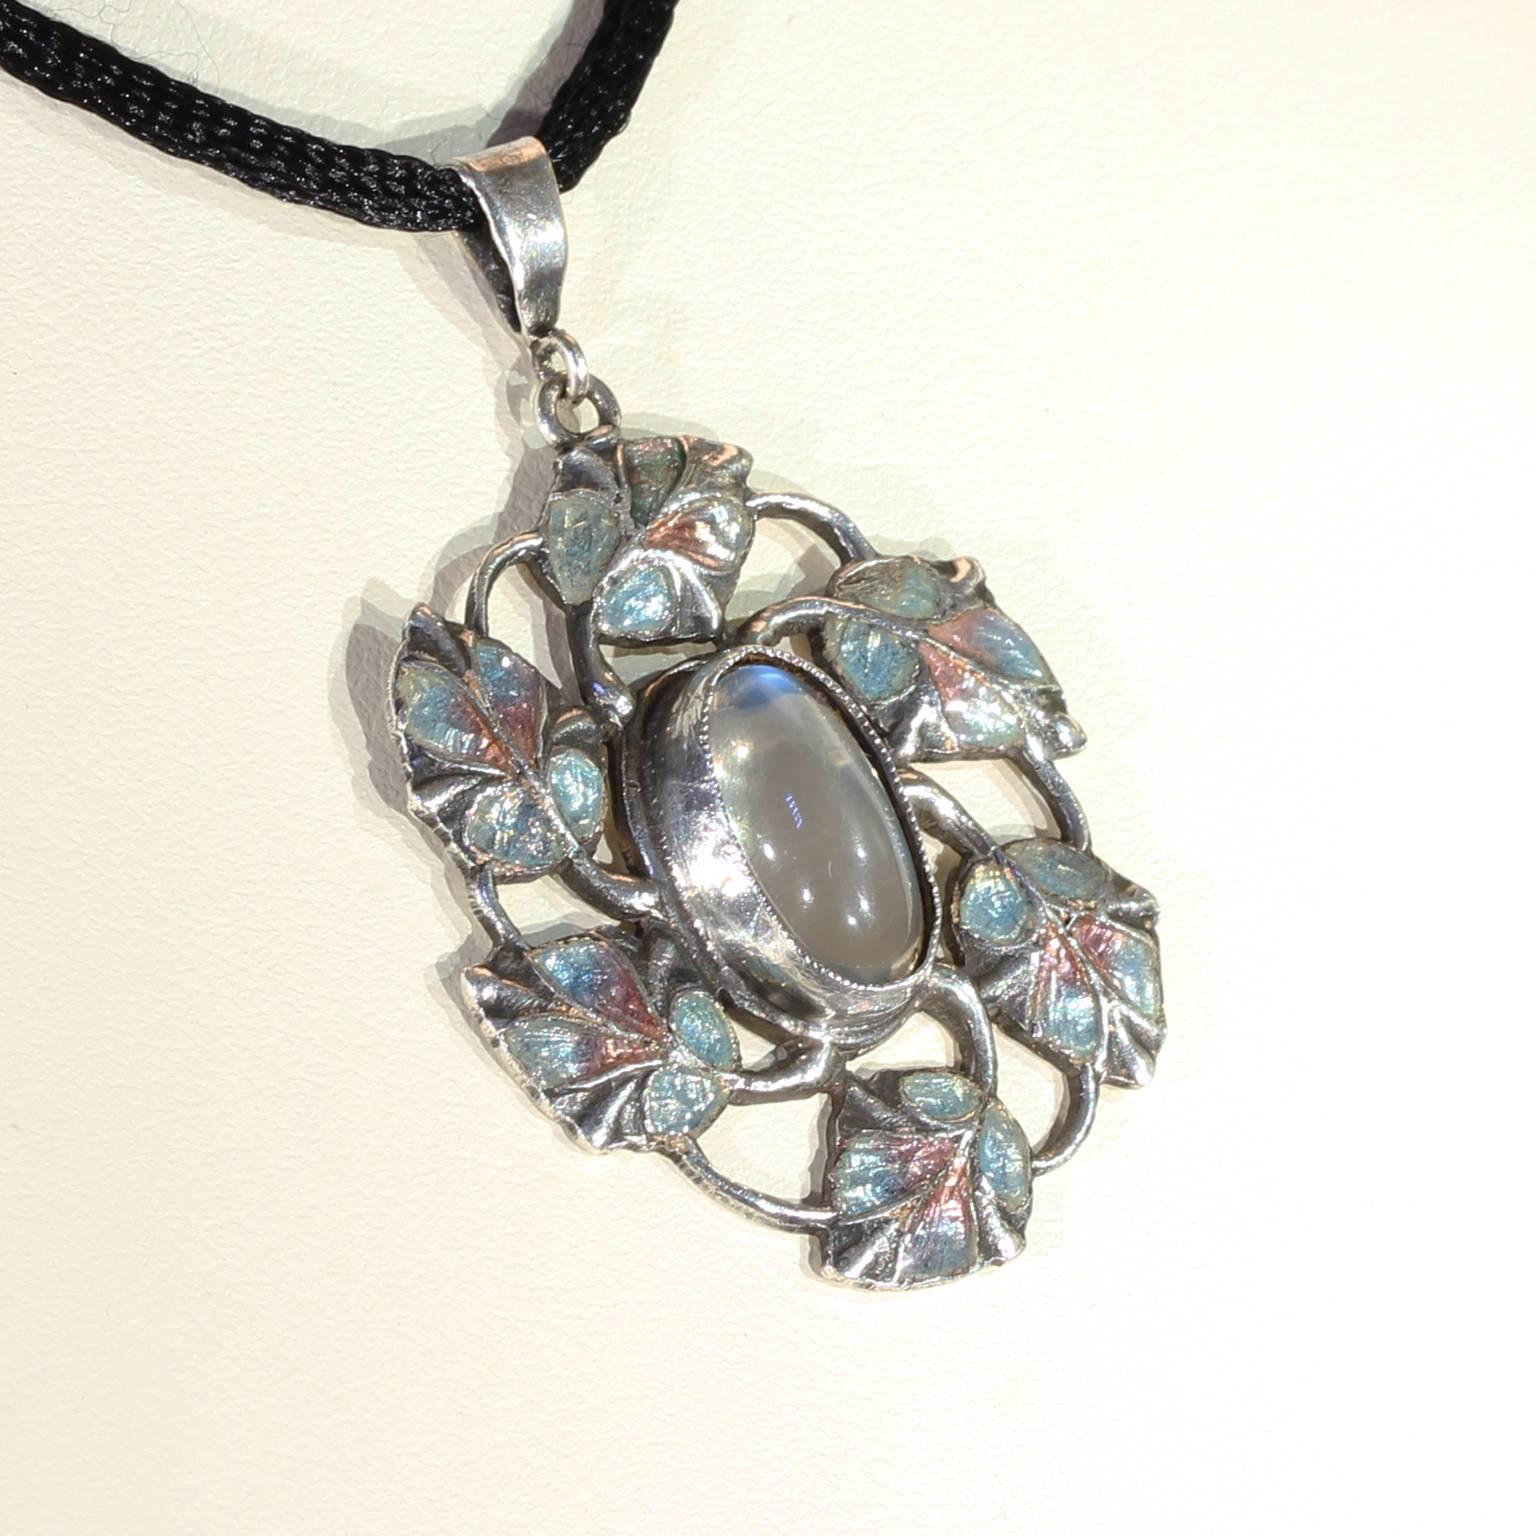 Women's or Men's Arts and Crafts Jessie King Pendant Moonstone Enamel Silver